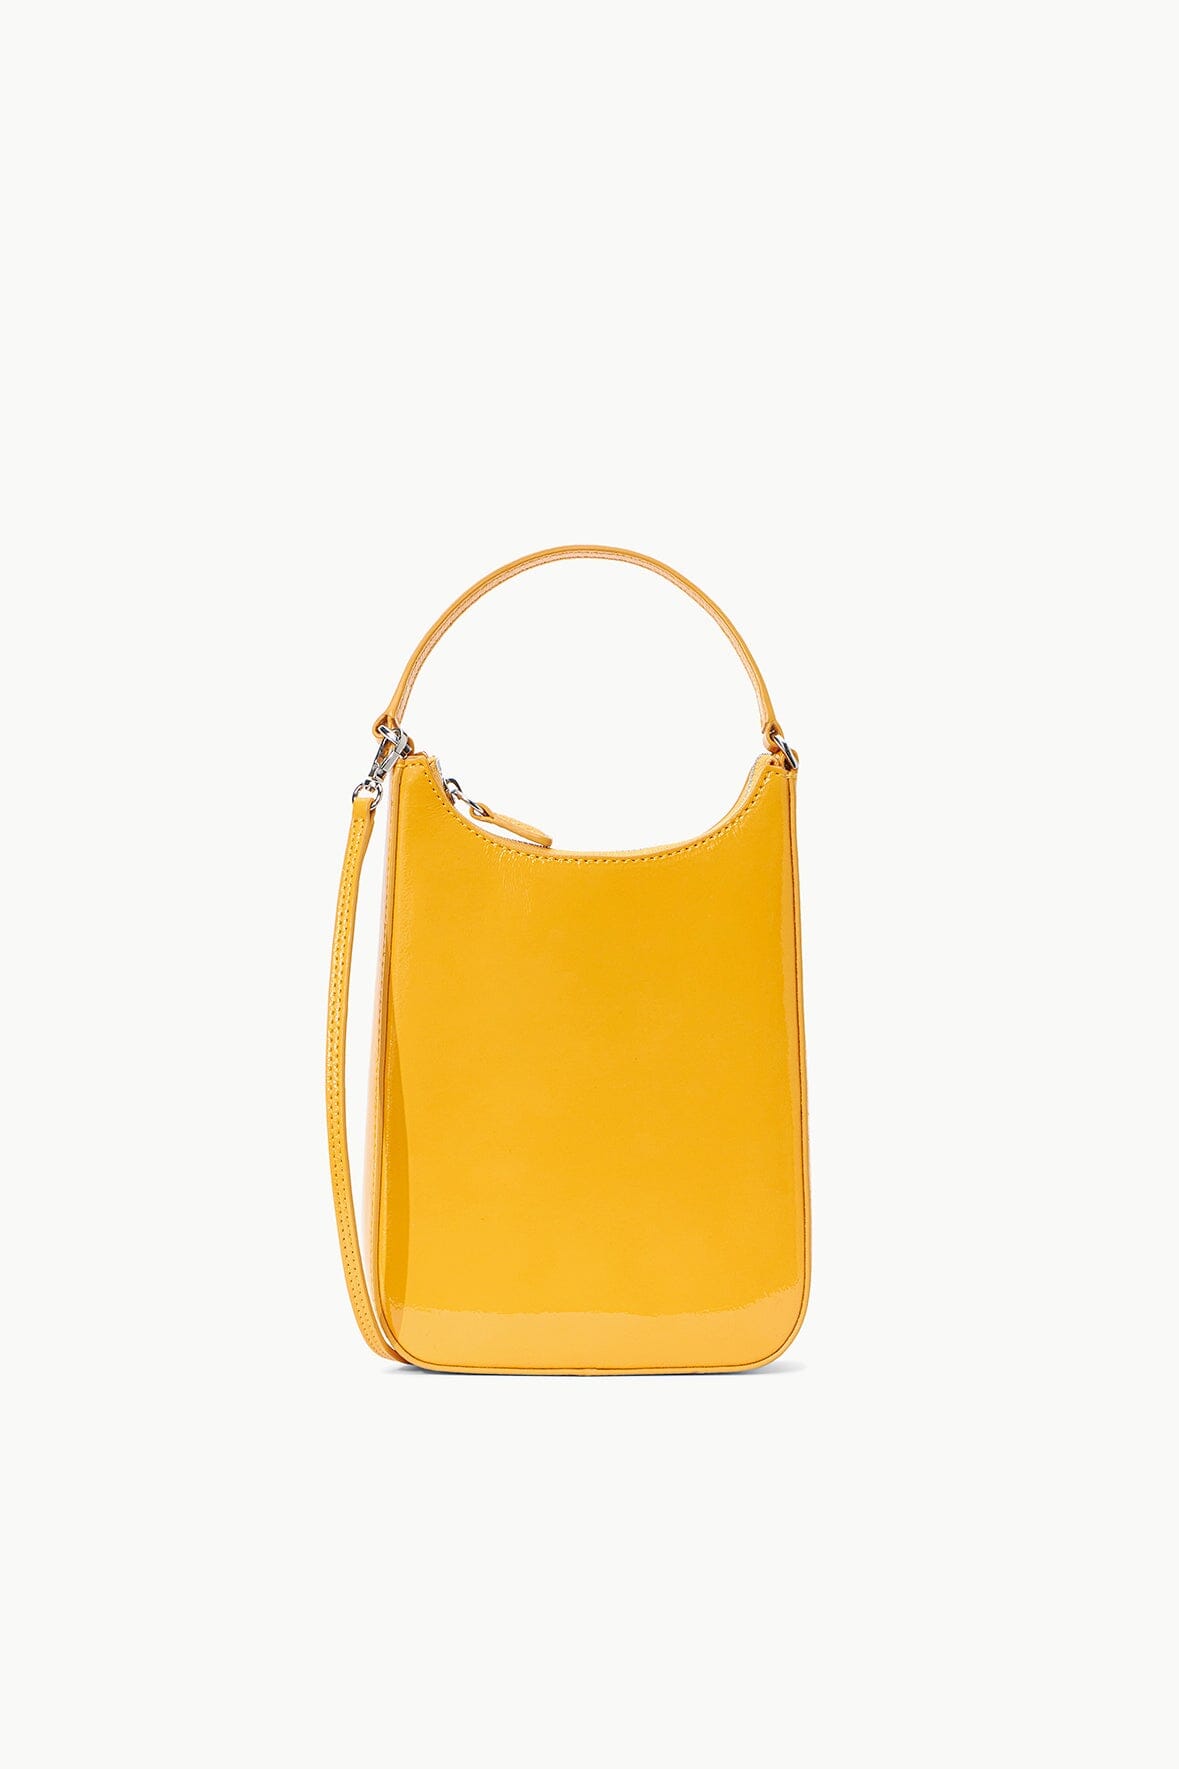 10 Spring It Bags That Are Trending on Instagram